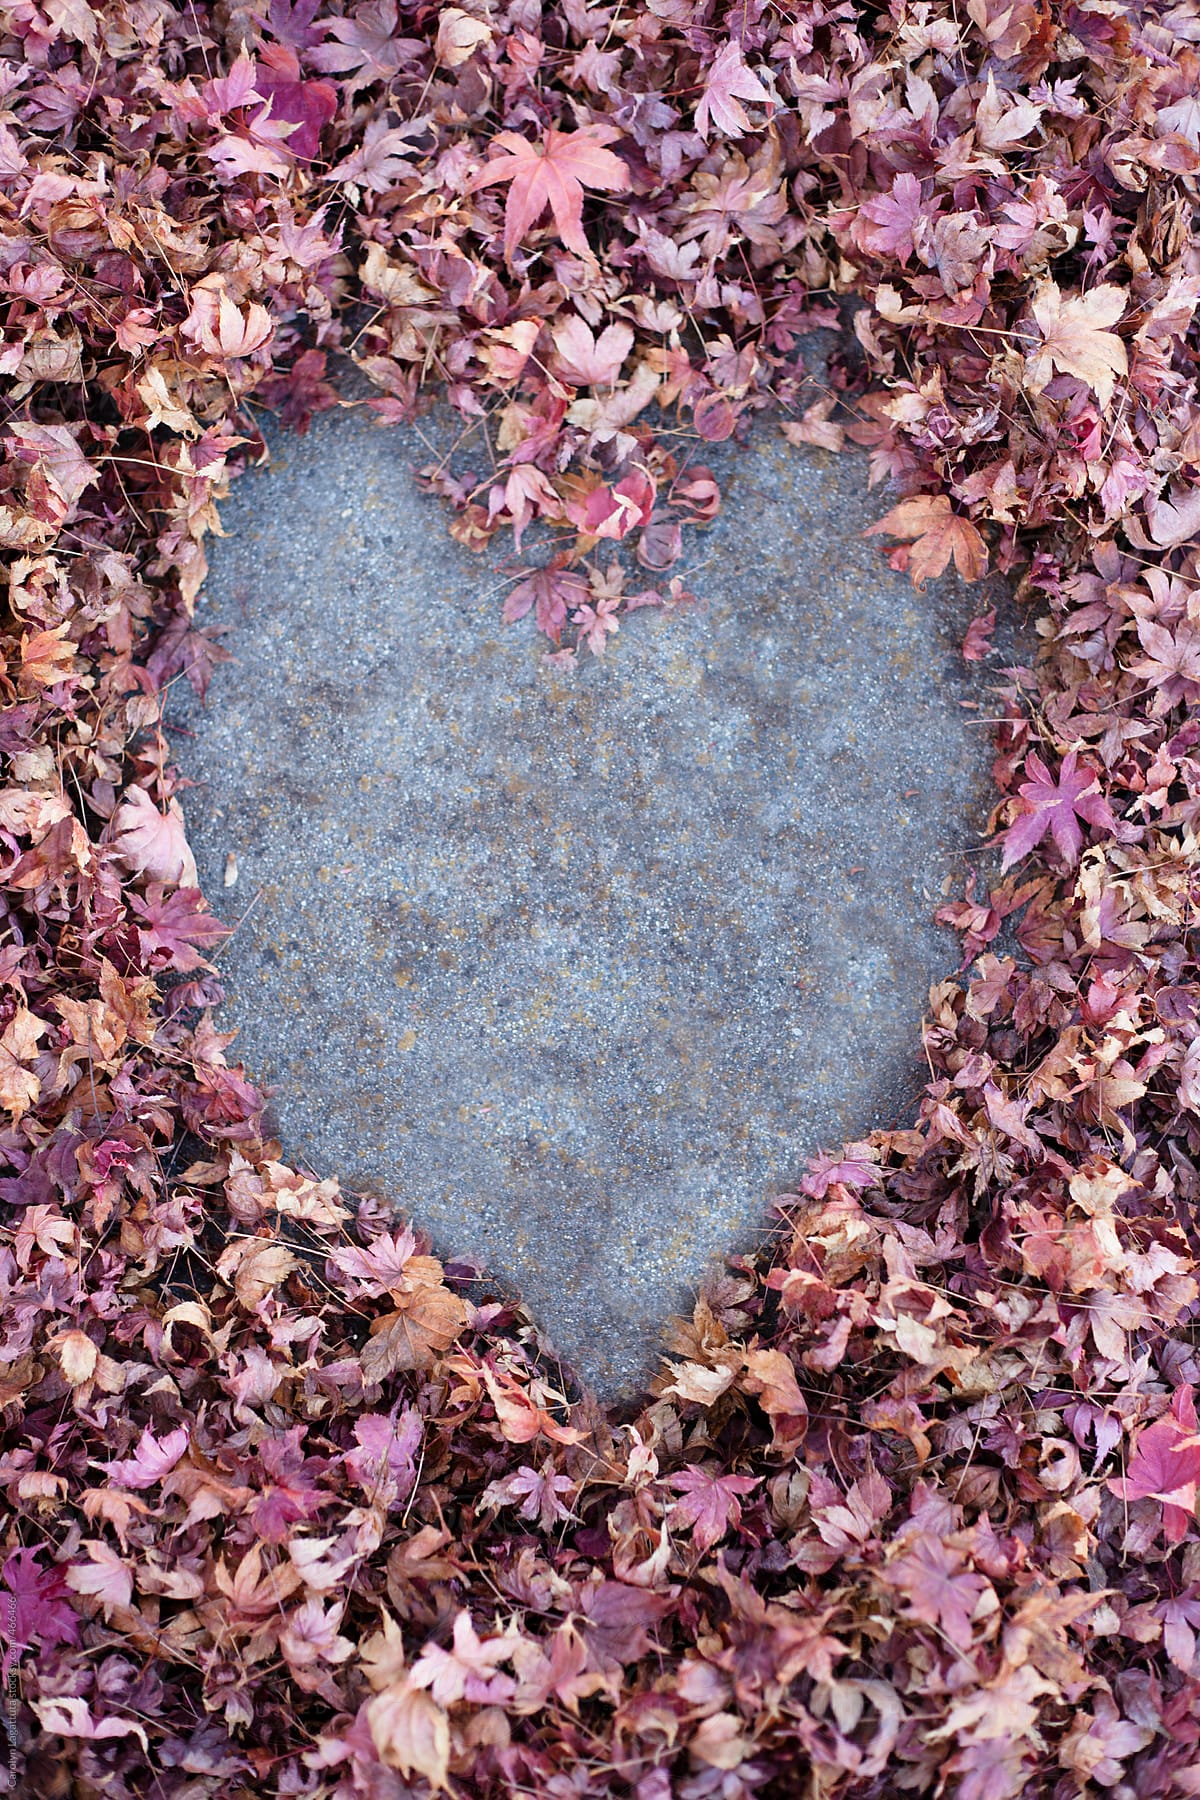 Fallen maple leafs on the ground - heart in the middle